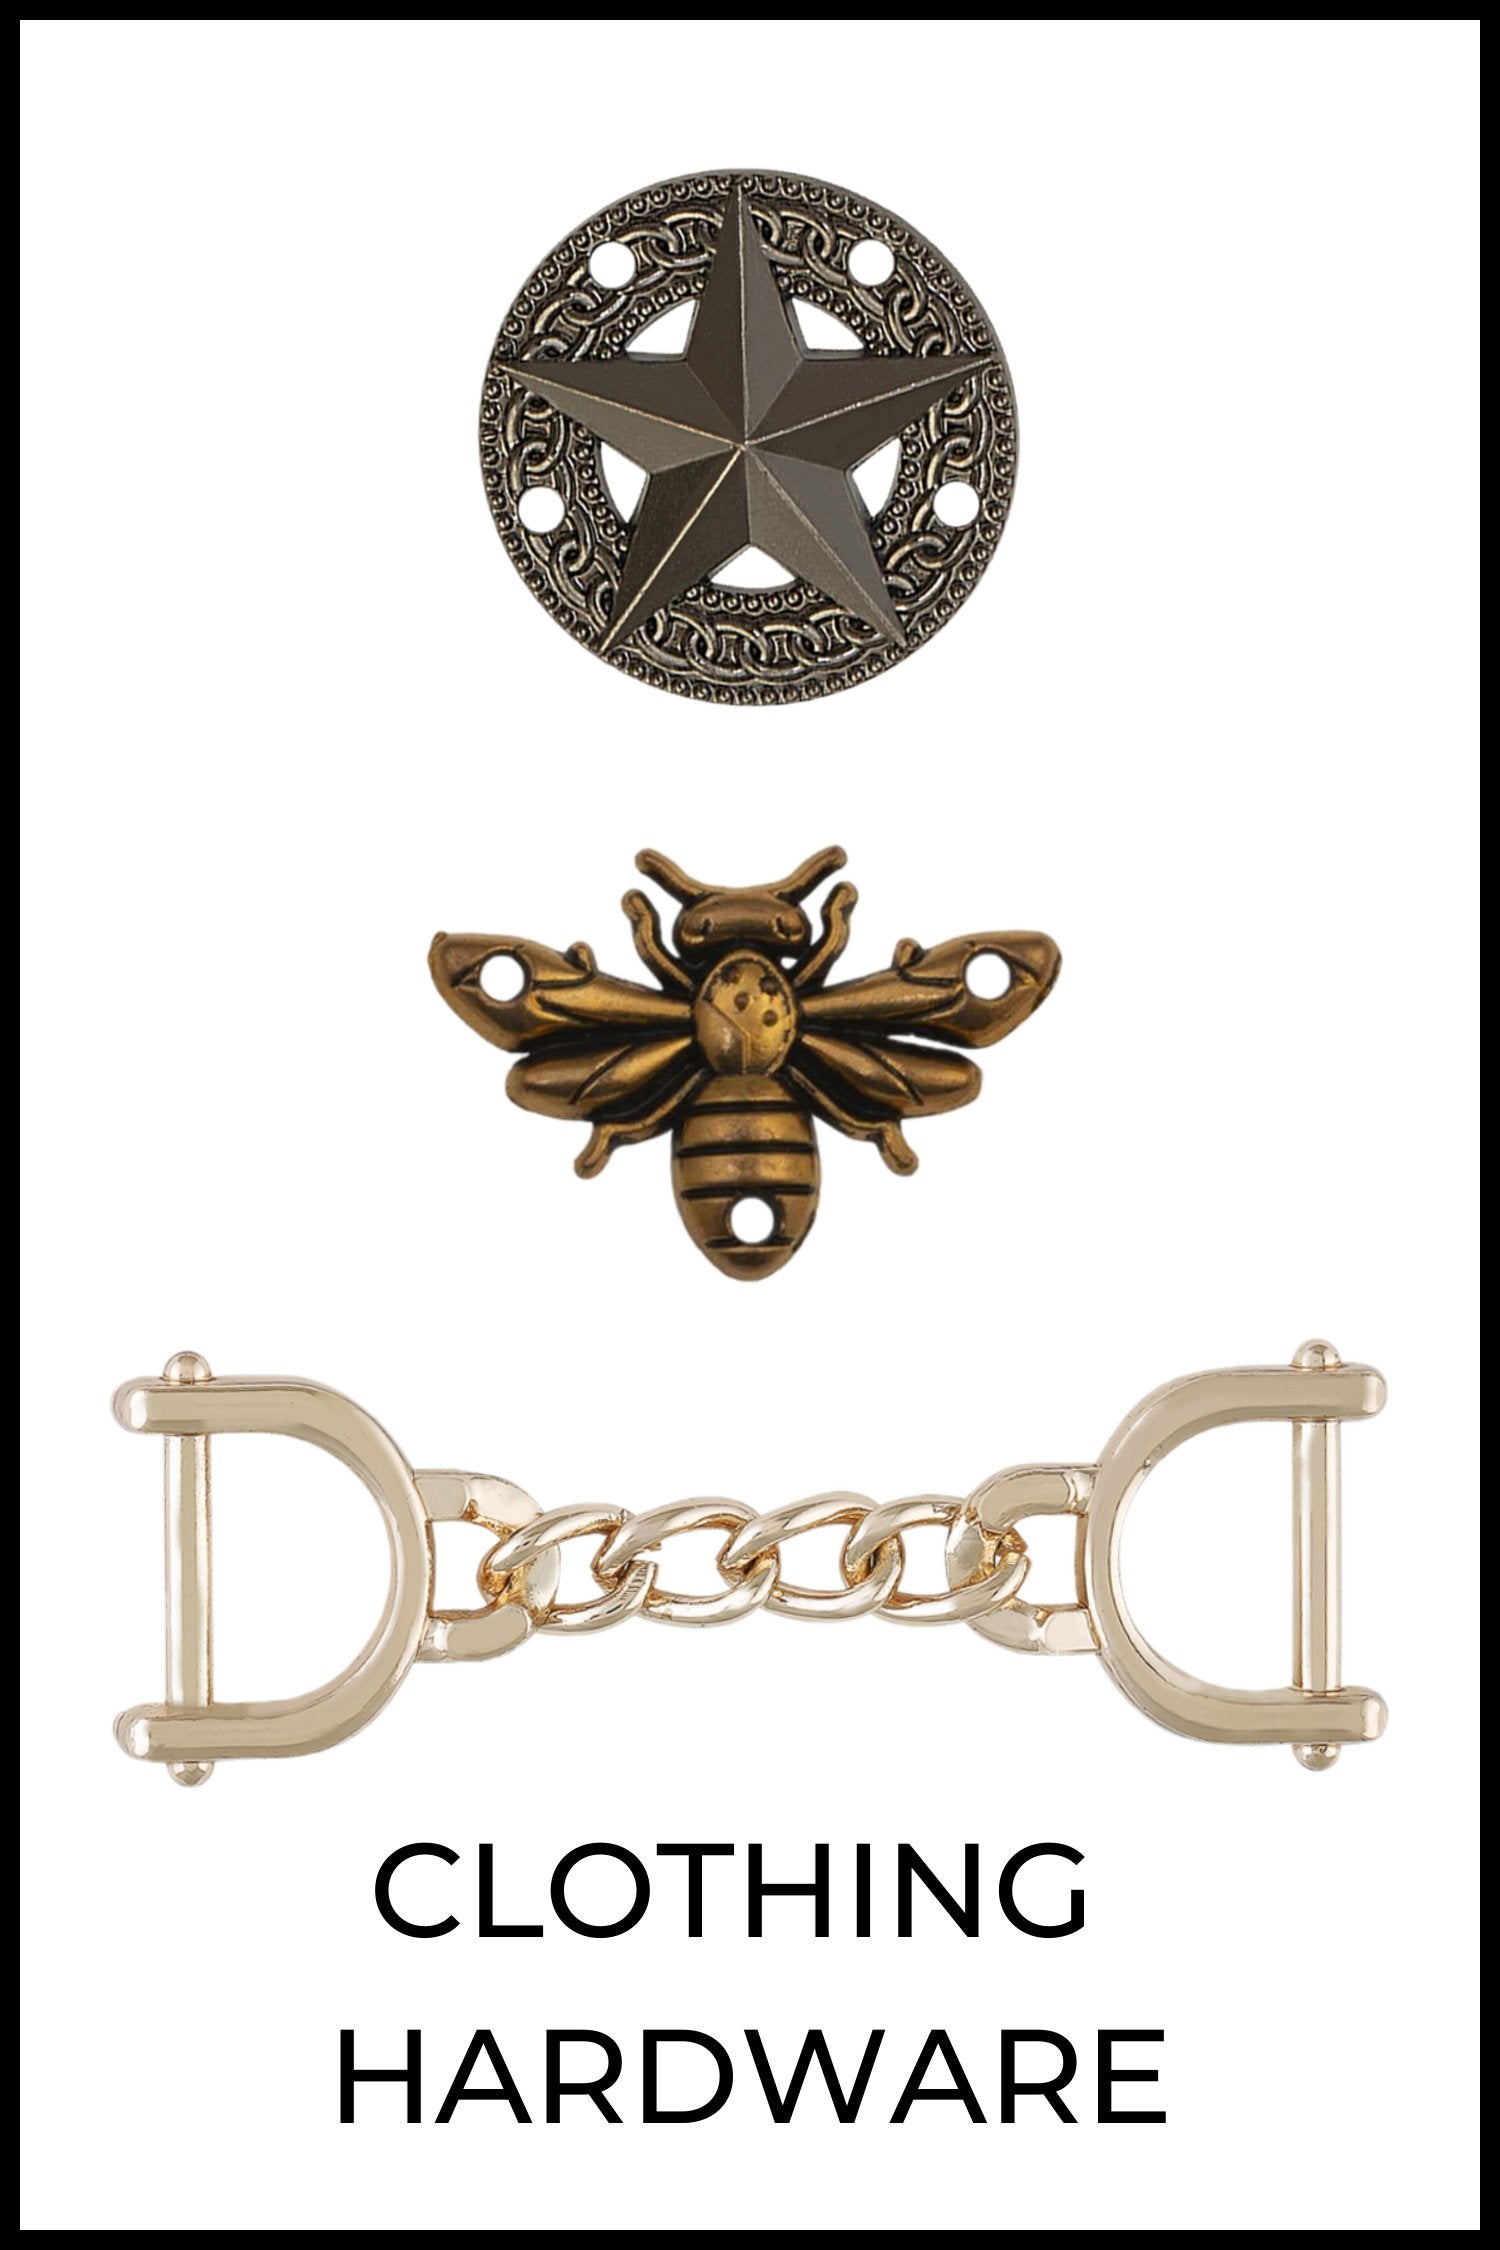 Buckles - Buy Buckles for Designer Clothing online at JHONEA – JHONEA  ACCESSORIES